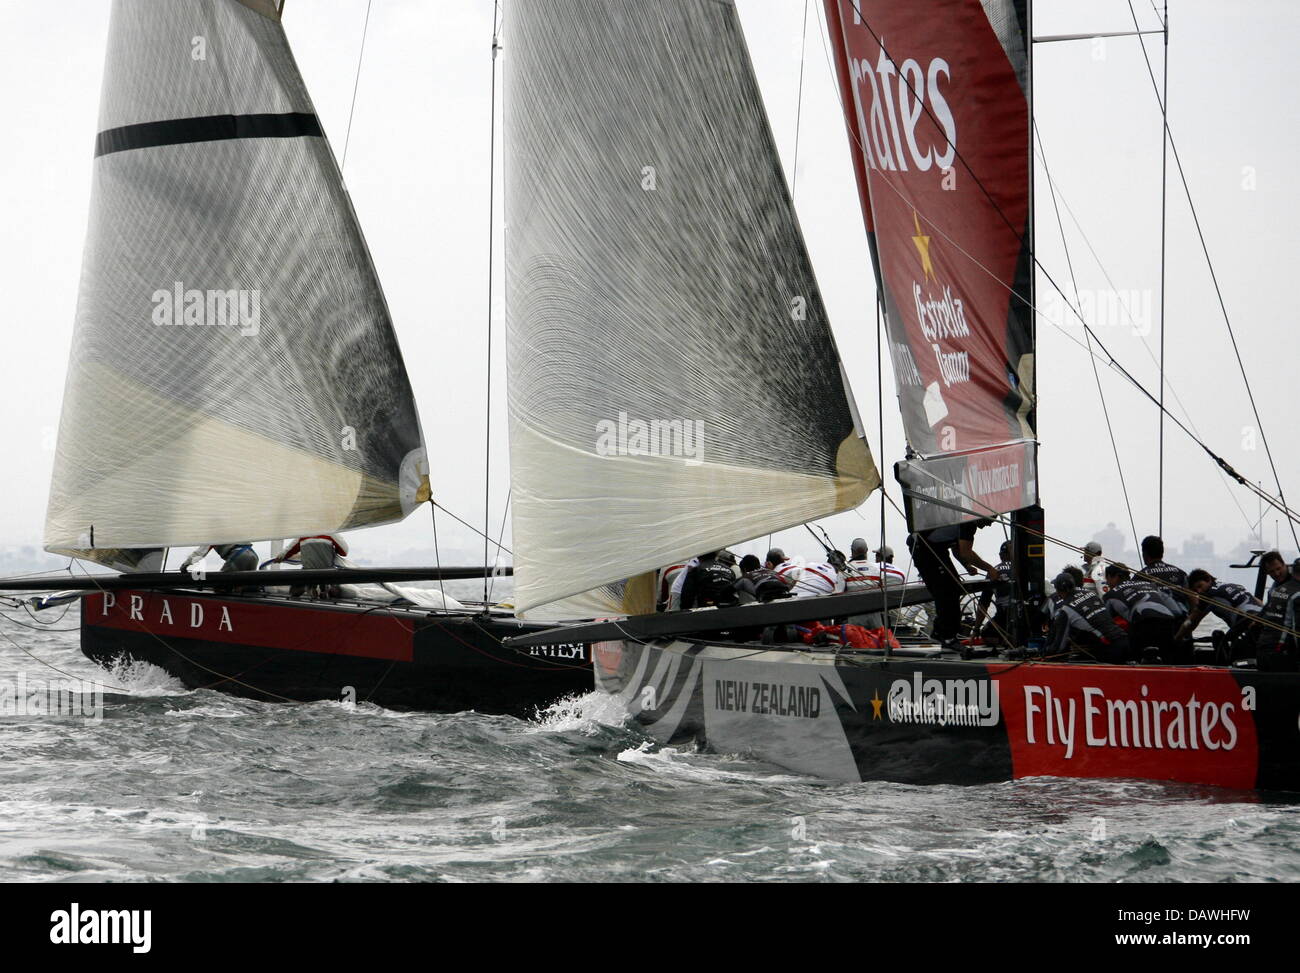 The Italian yacht of Team Luna Rossa shown in action during the ninth race  (Flight 9) of Louis Vuitton Cup, the challengers' regatta for the 'America's  Cup', off the coast of Valencia